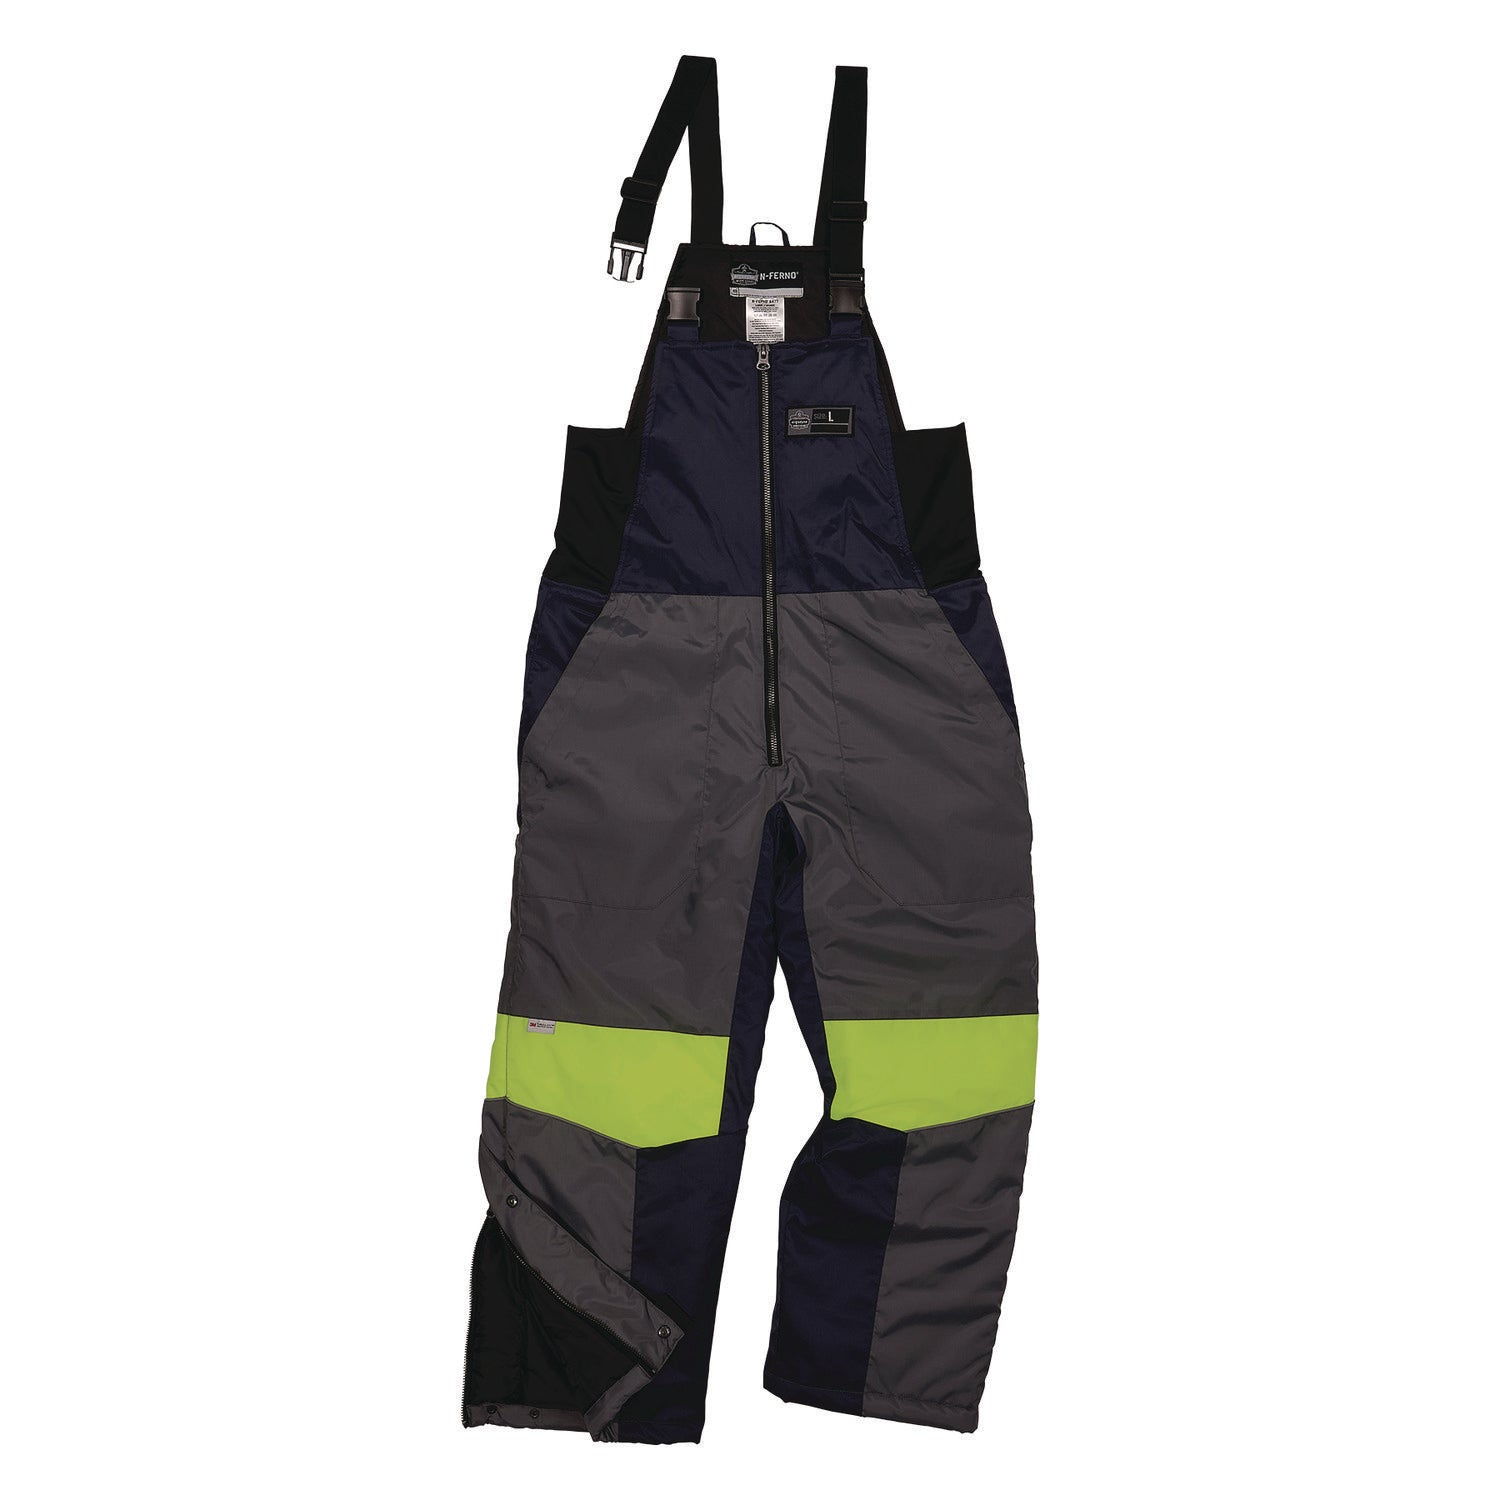 n-ferno-6477-insulated-cooler-bib-overall-small-navy-ships-in-1-3-business-days_ego41262 - 1